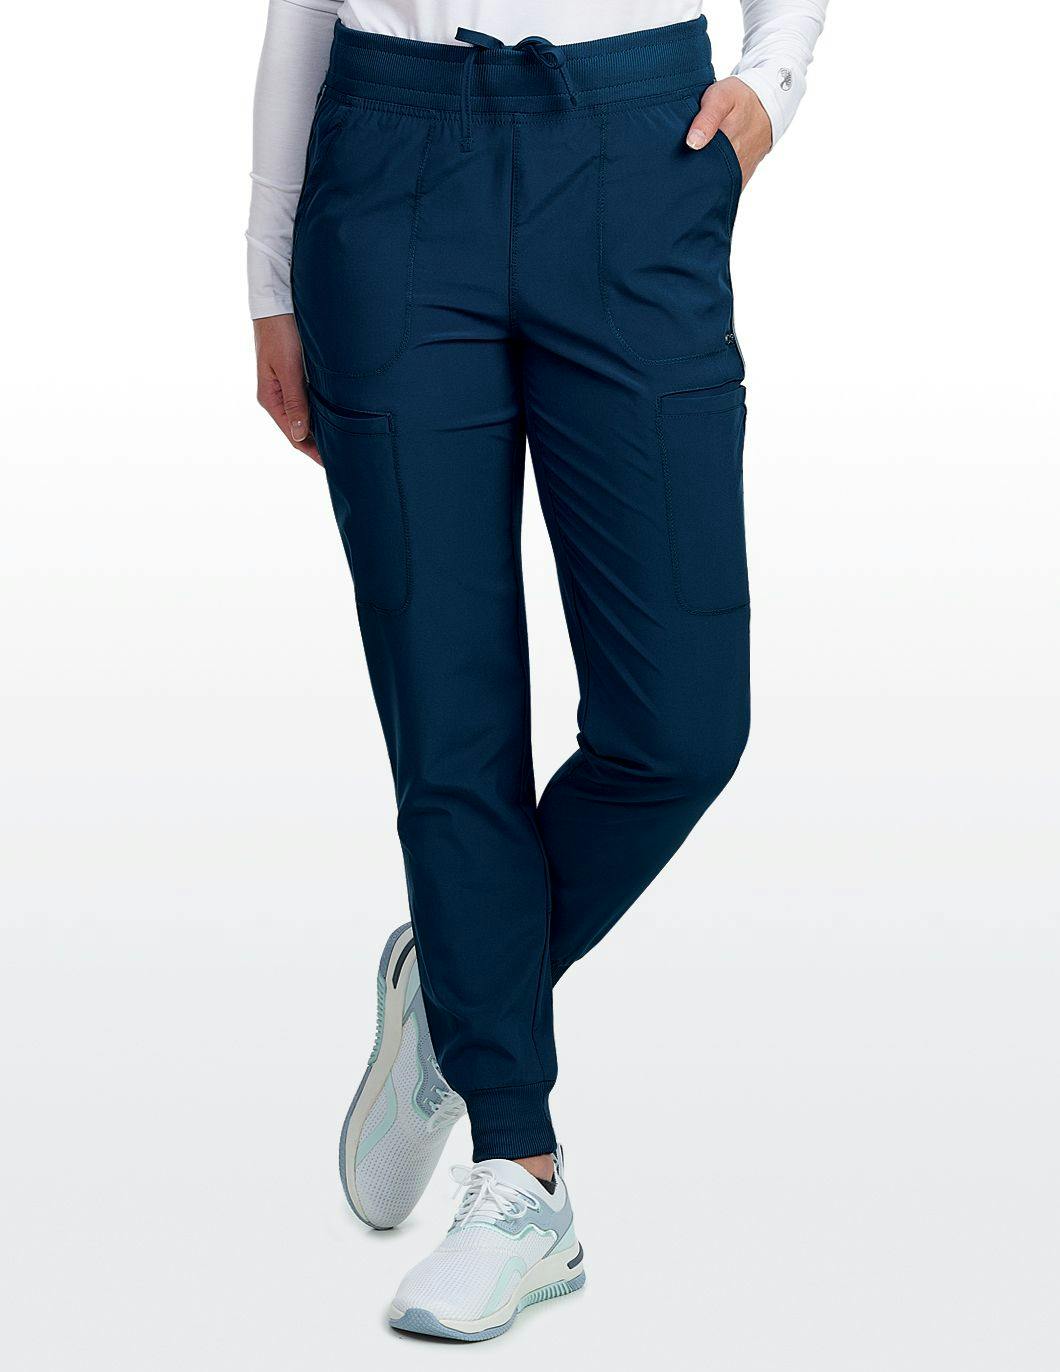 infinity-mid-rise-jogger-pant-navy